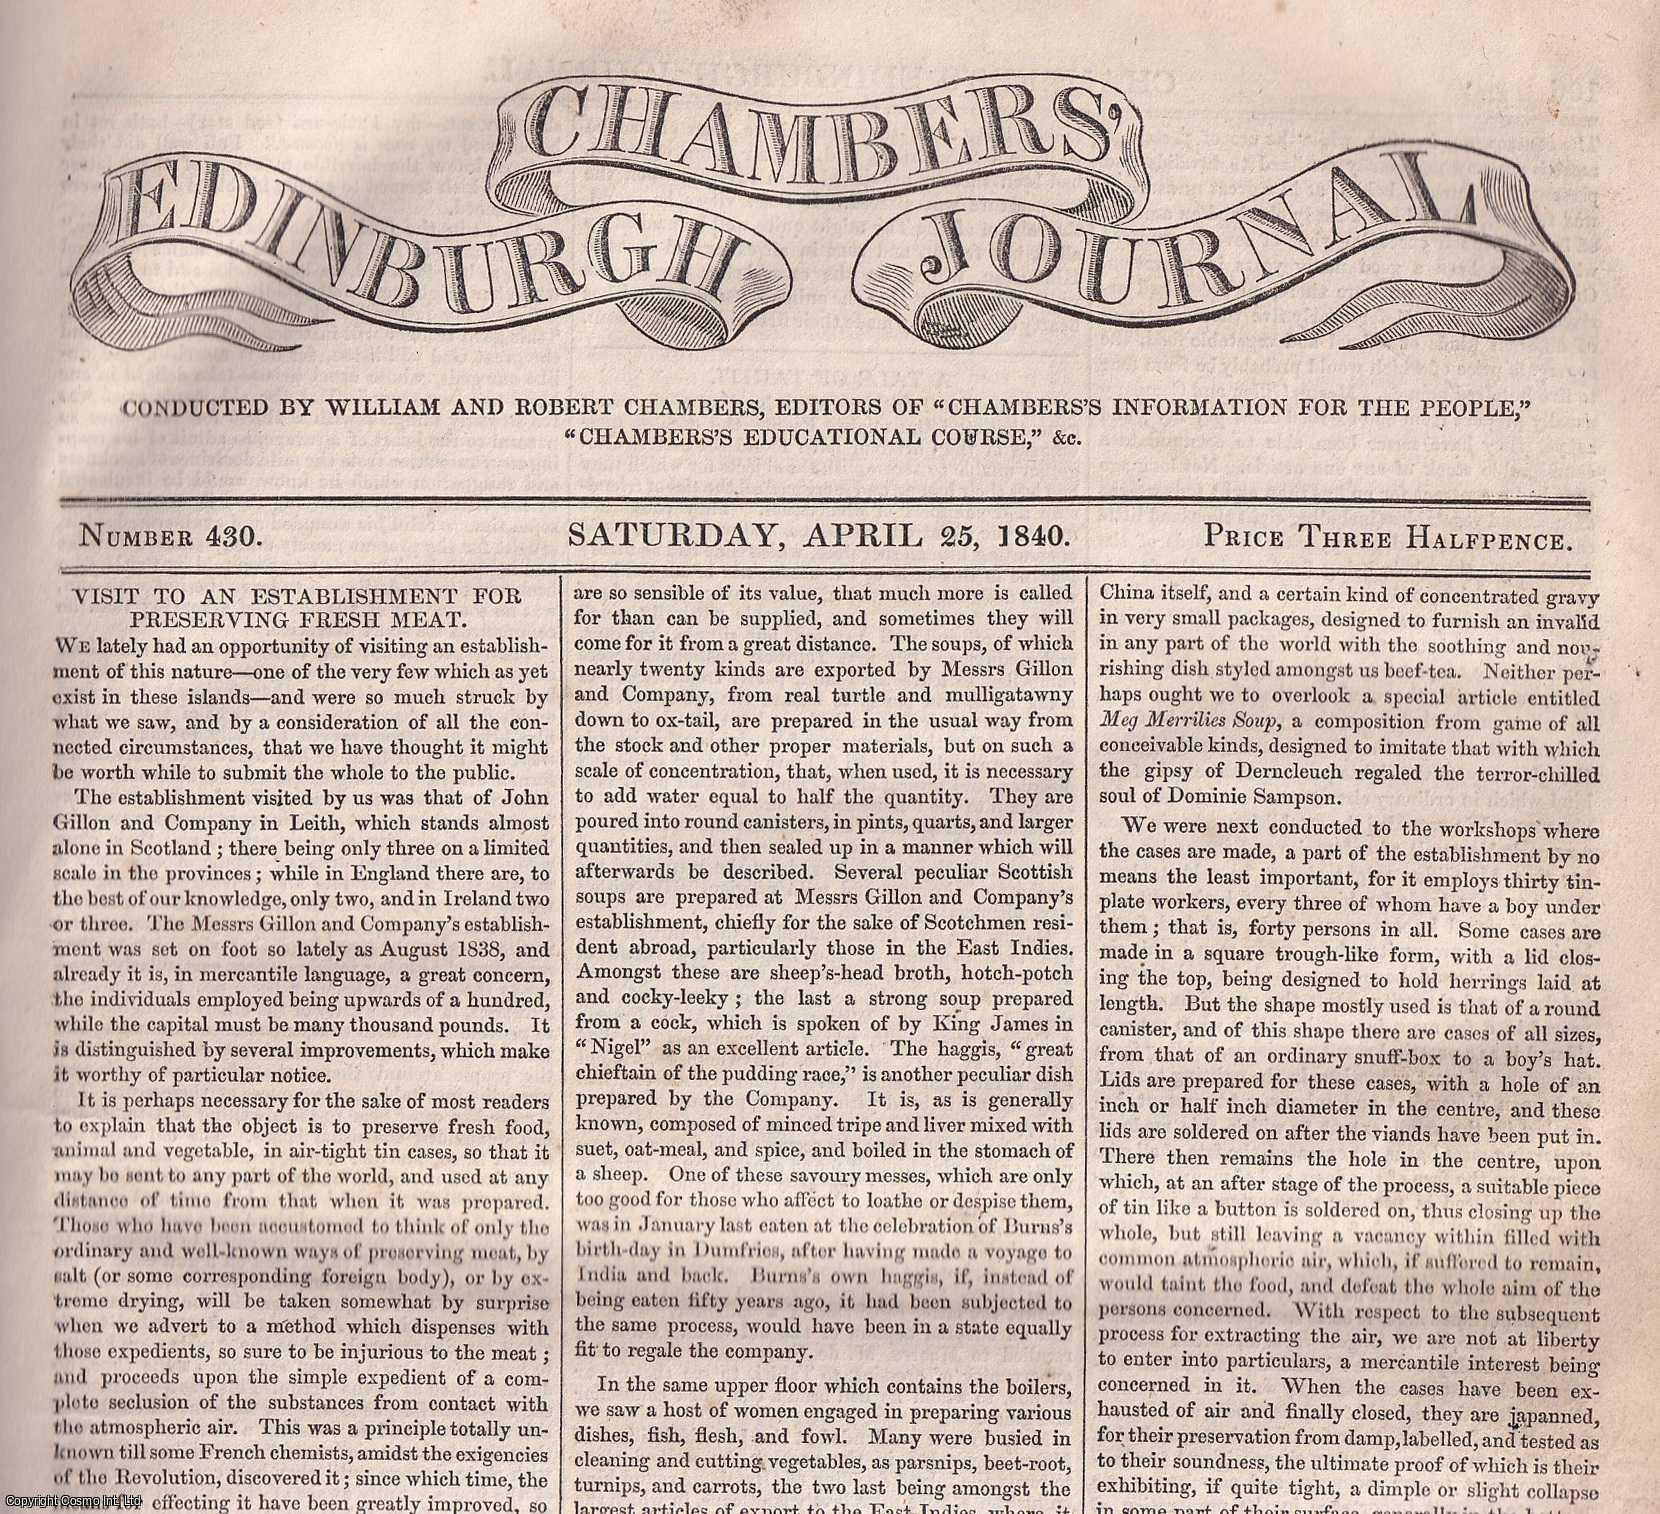 Chambers' Edinburgh Journal - A Visit to an Establishment for Preserving Fresh Meat. John Gillon & Co. in Leith, one of only 3 such companies in Scotland.